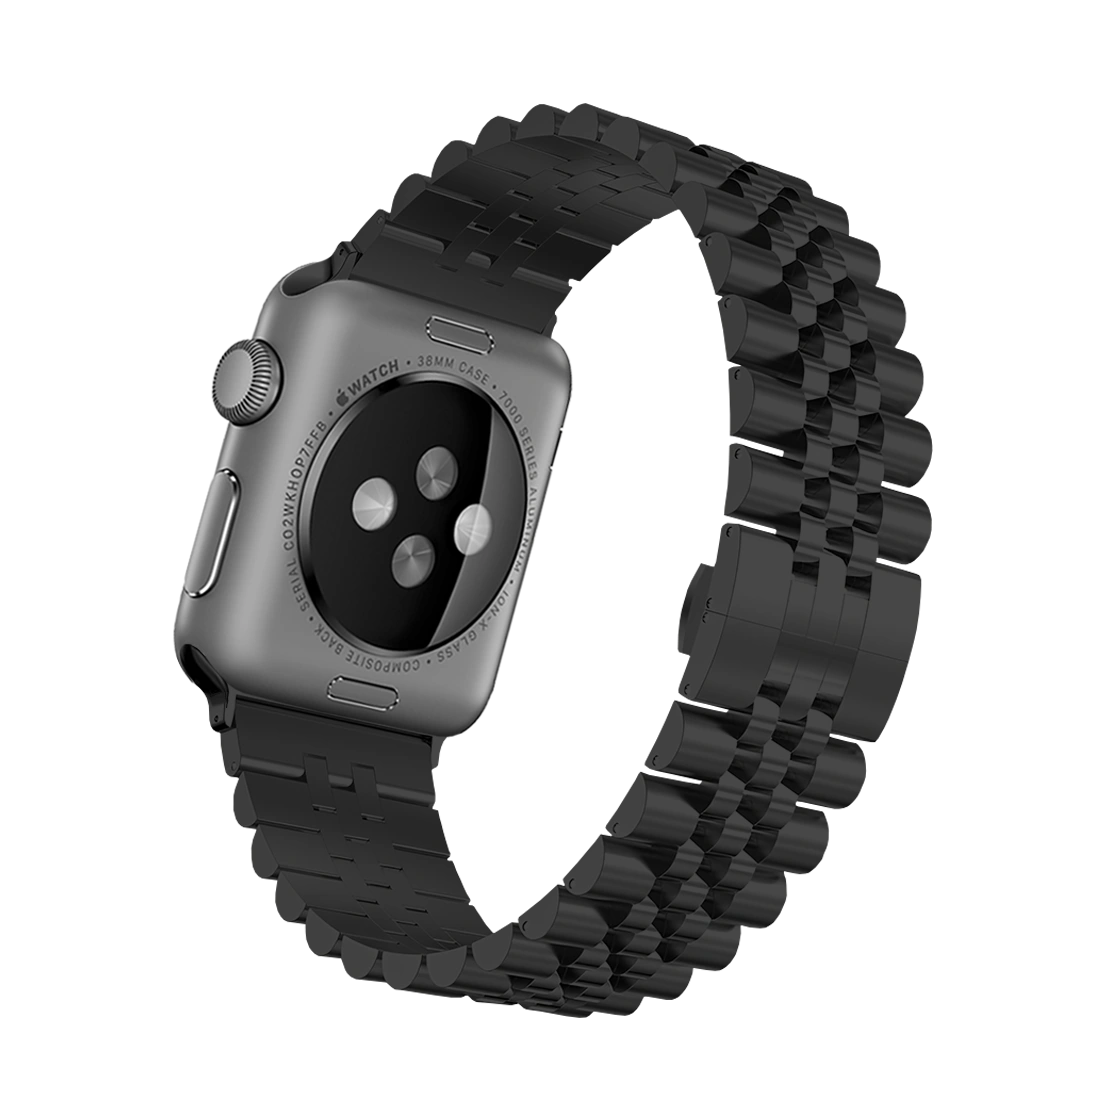 Apple Watch Ultra Titanium Case with Blue/Gray Trail Loop